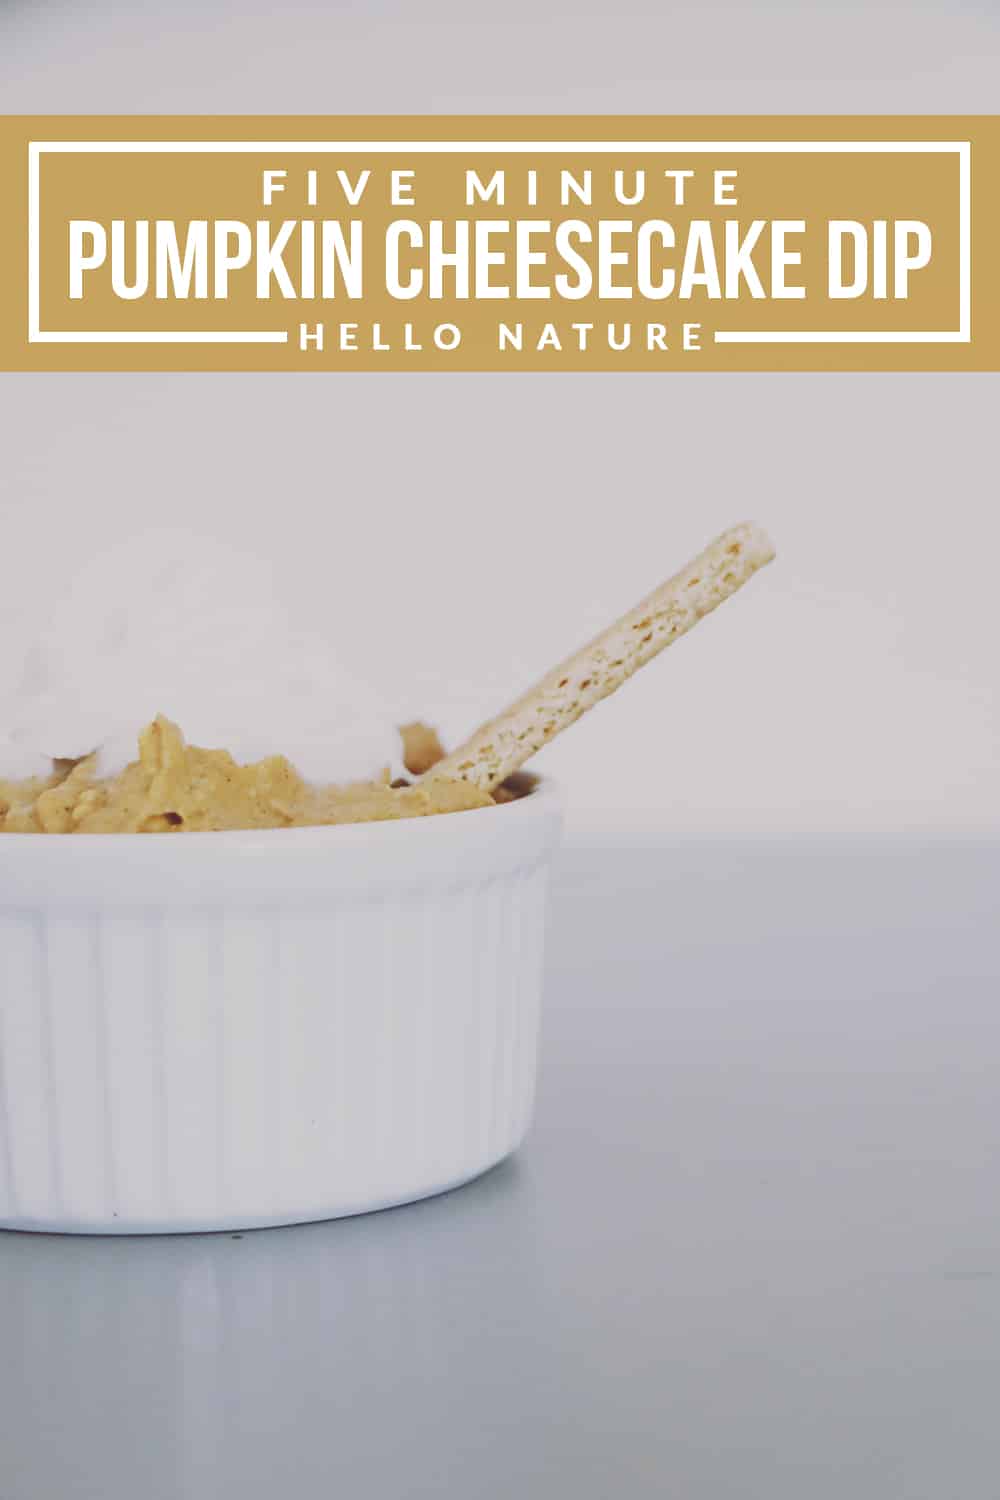 Bring something new to your autumn get-togethers! This pumpkin cheesecake dip is sure to be a huge hit for the whole family!